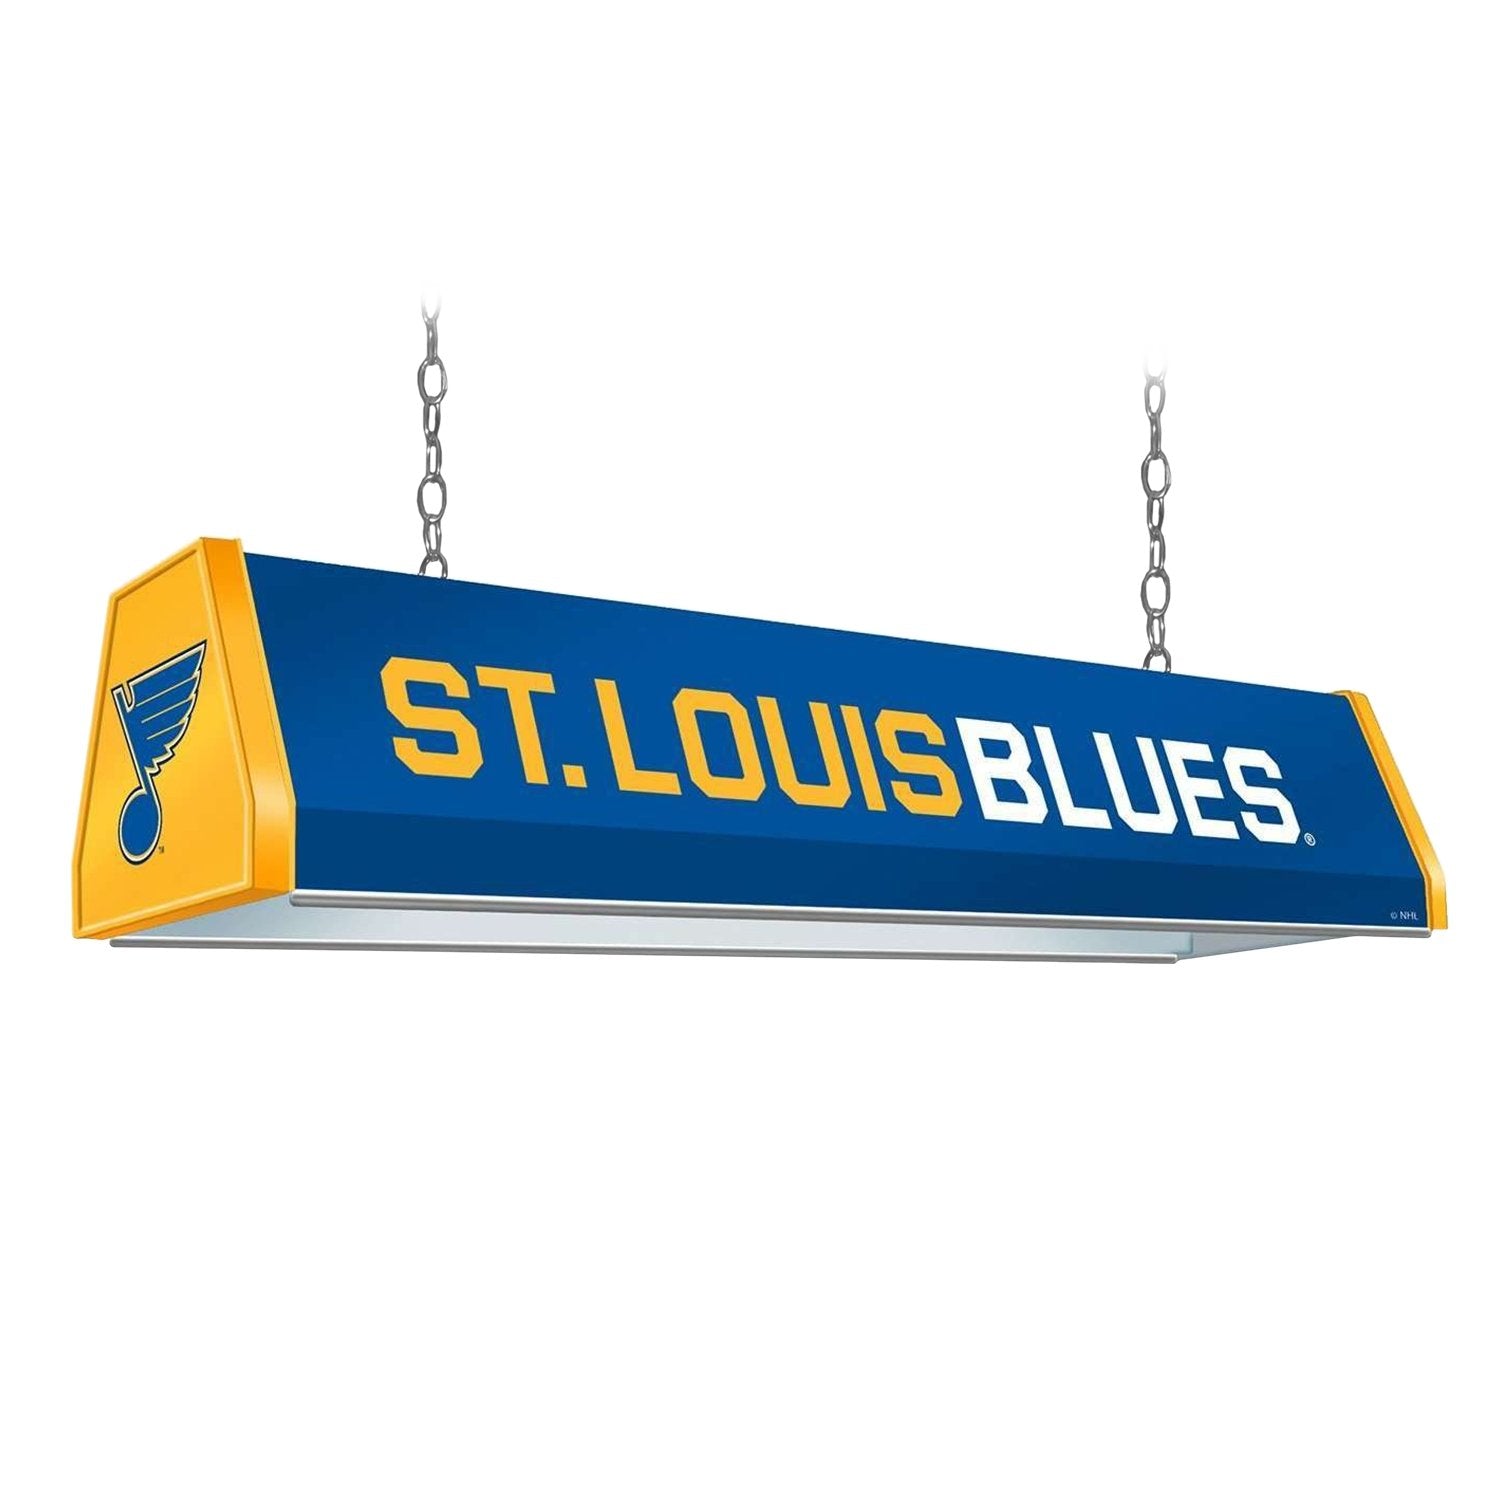 St. Louis Blues LED Rectangle Tabletop Sign